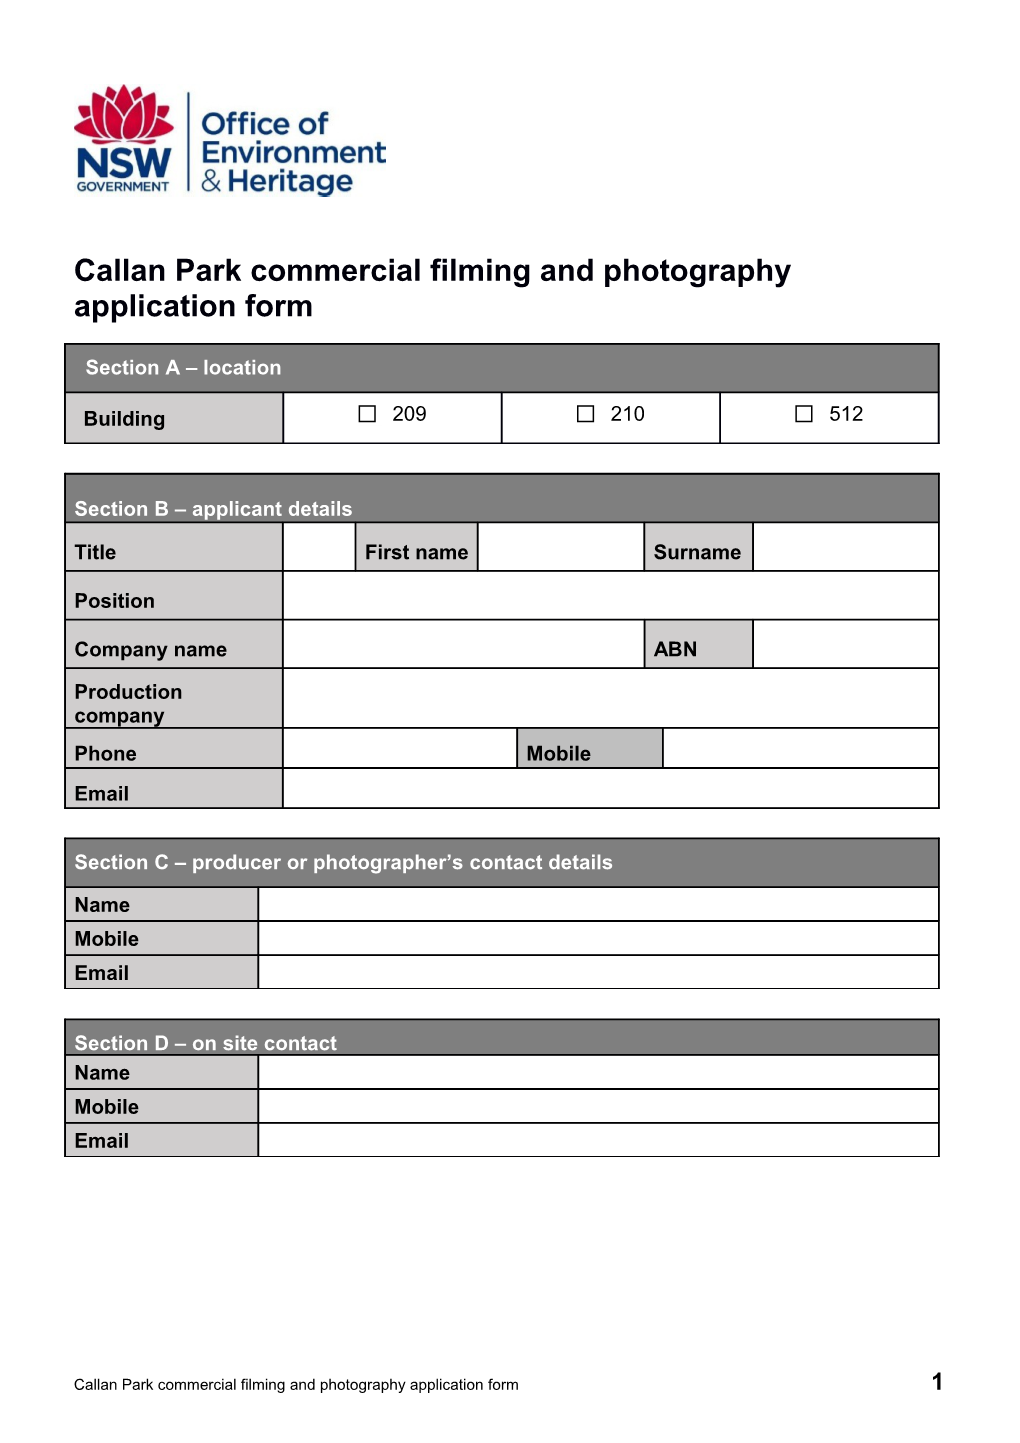 Callan Park Commercial Filming and Photography Application Form